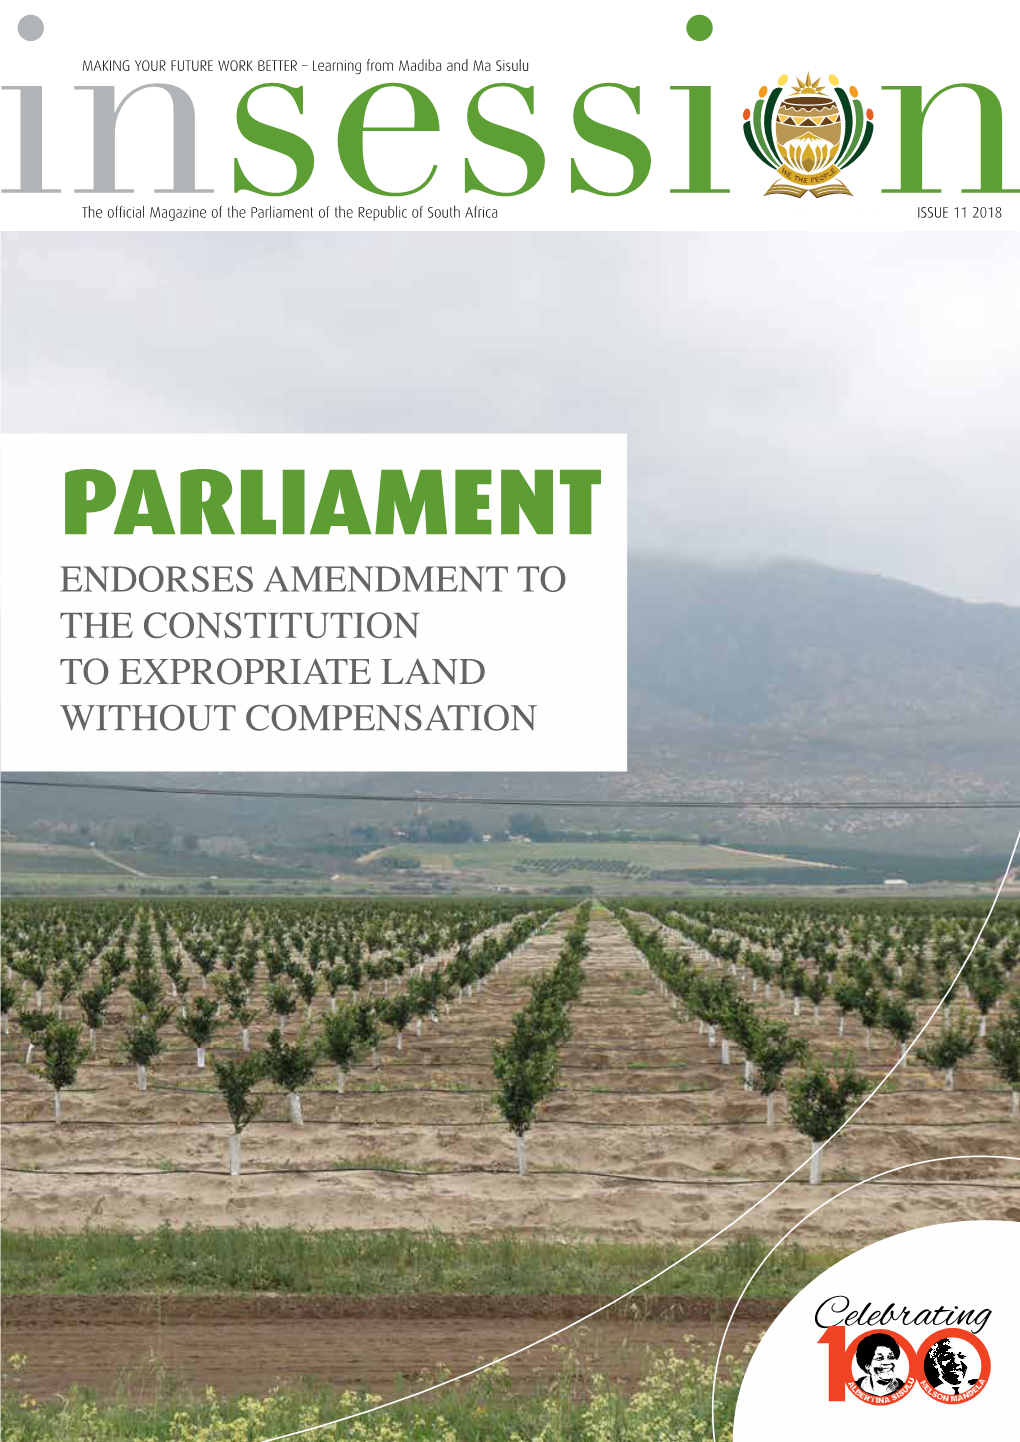 Under- Neath: Parliament Endorses Amendment to the Constitution to Expropriate Land Without Compensation Contents